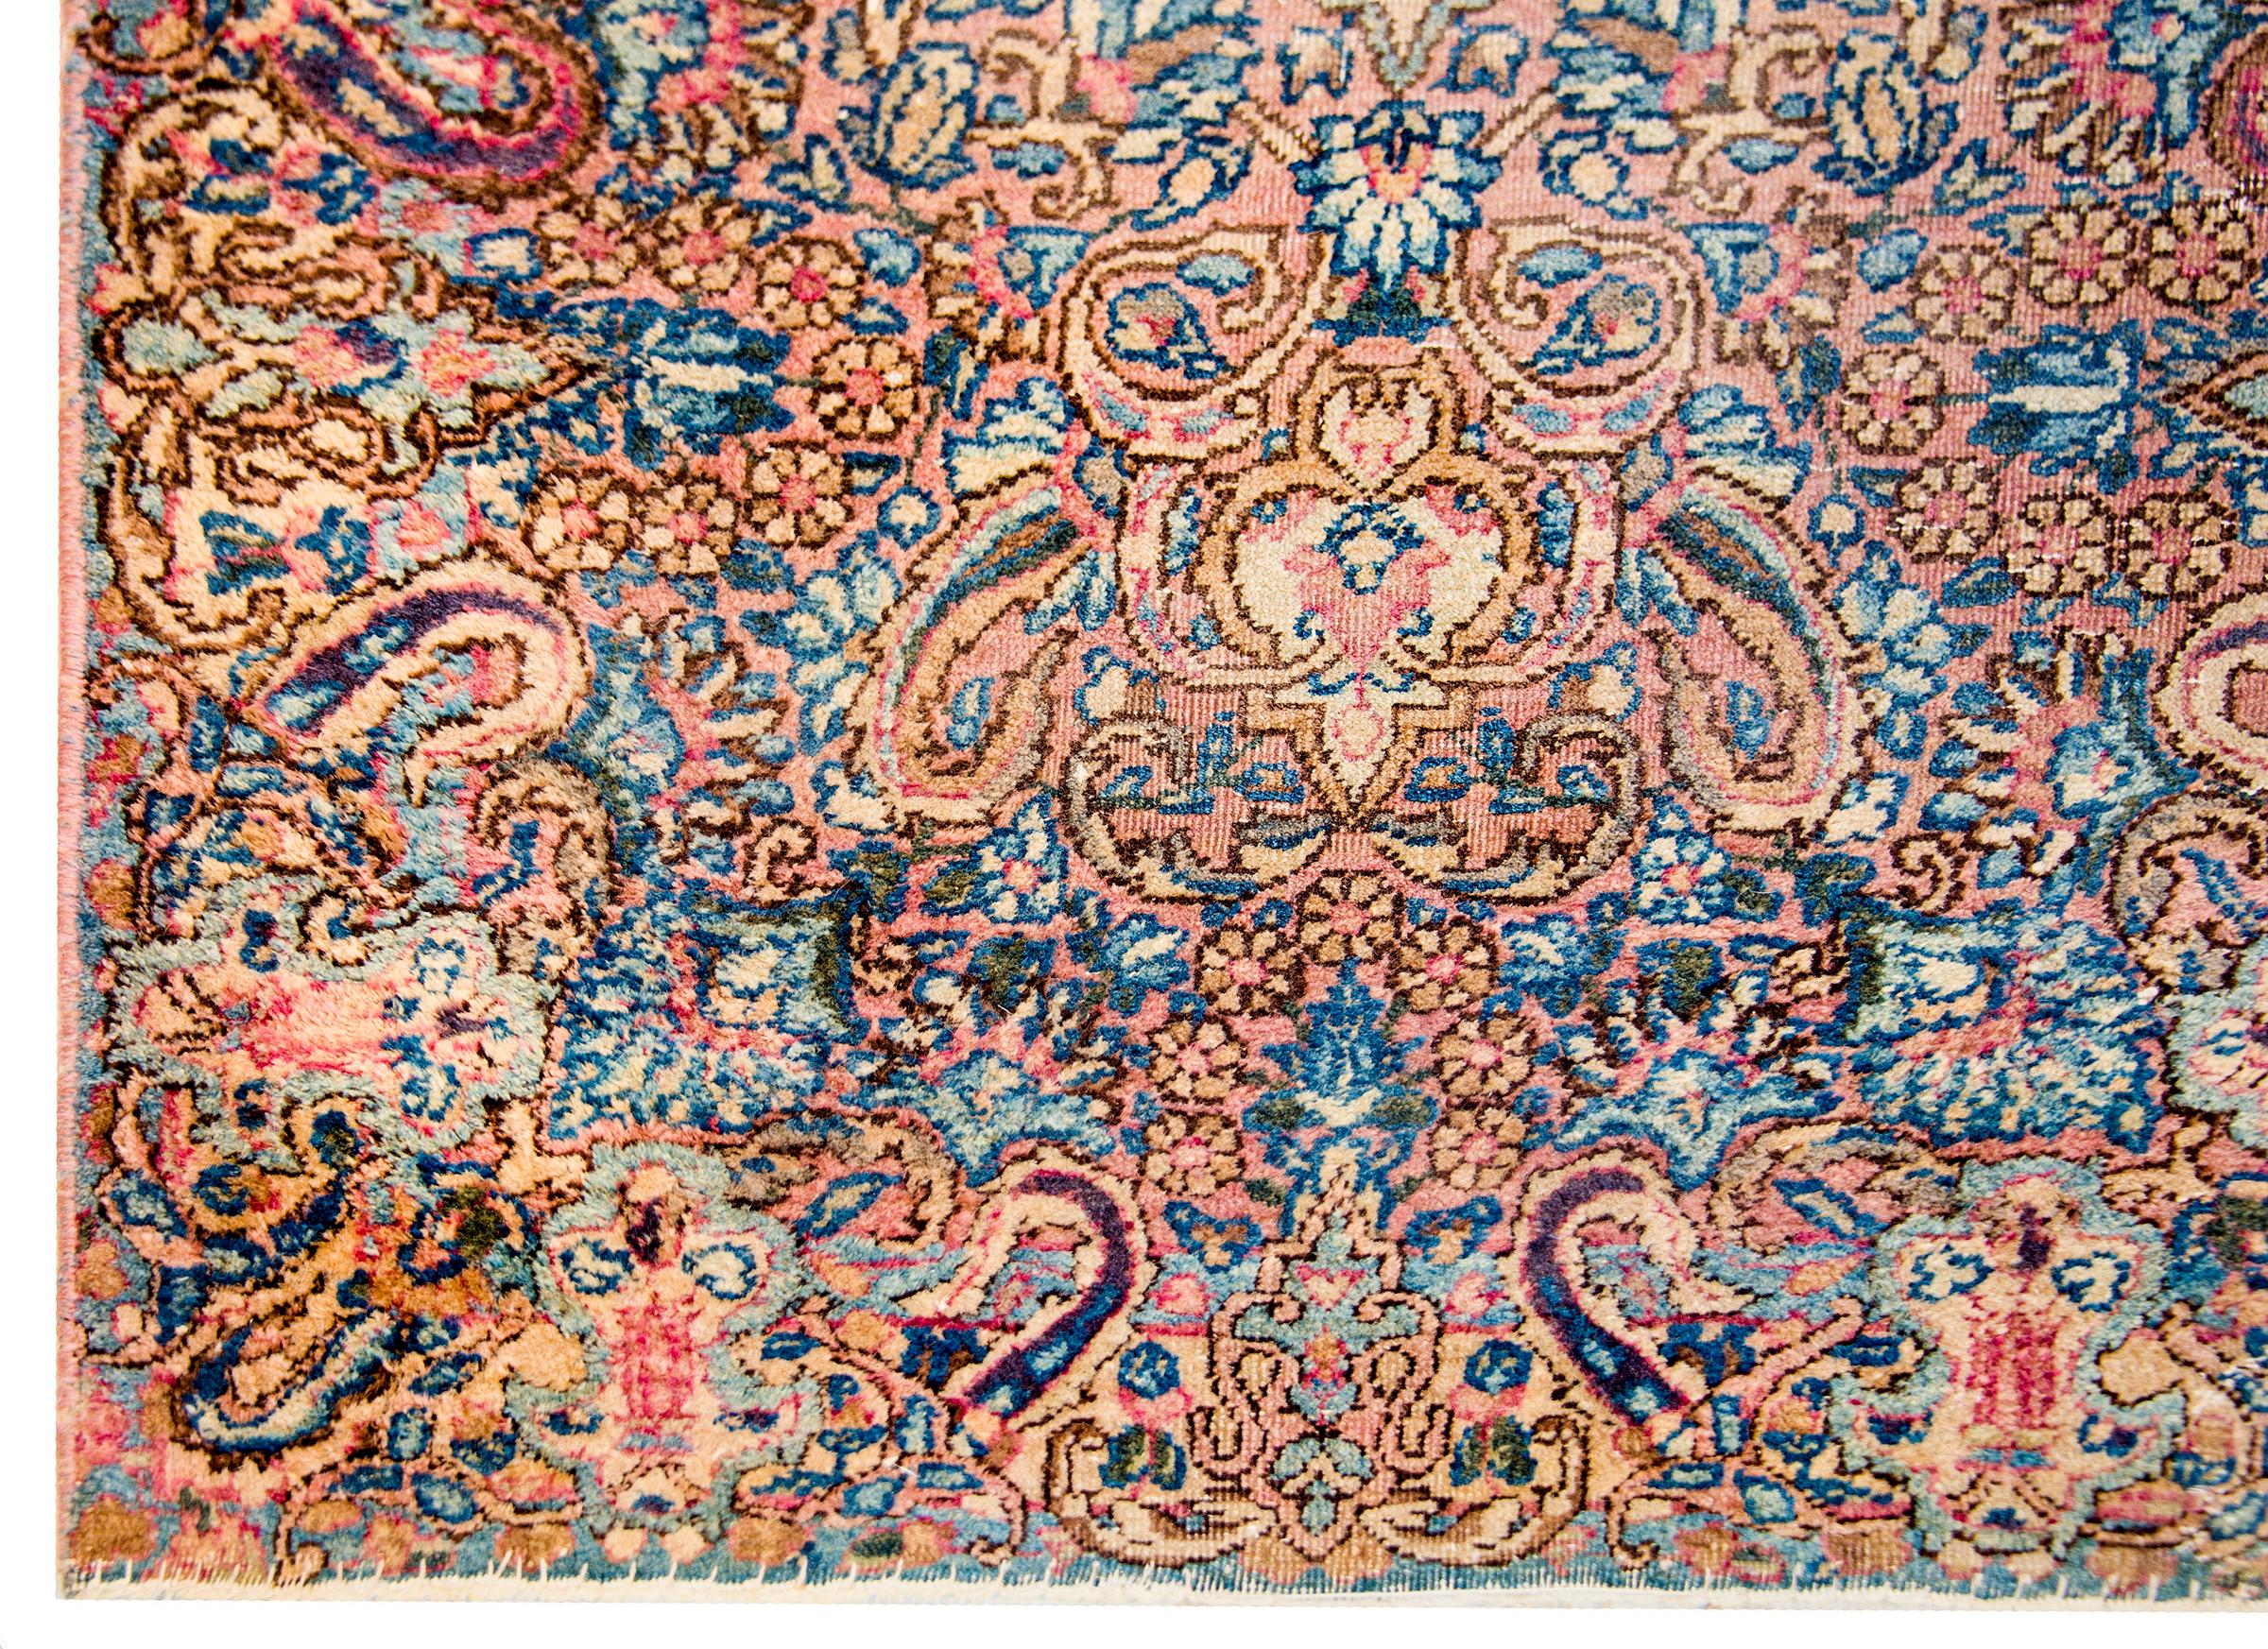 An early 20th century Persian Kirman rug with a beautiful all-over floral and paisley pattern woven in traditional Kirman colors of cranberry, light and dark indigo, and cream vegetable dyed wool. The border blends in with the field to create an